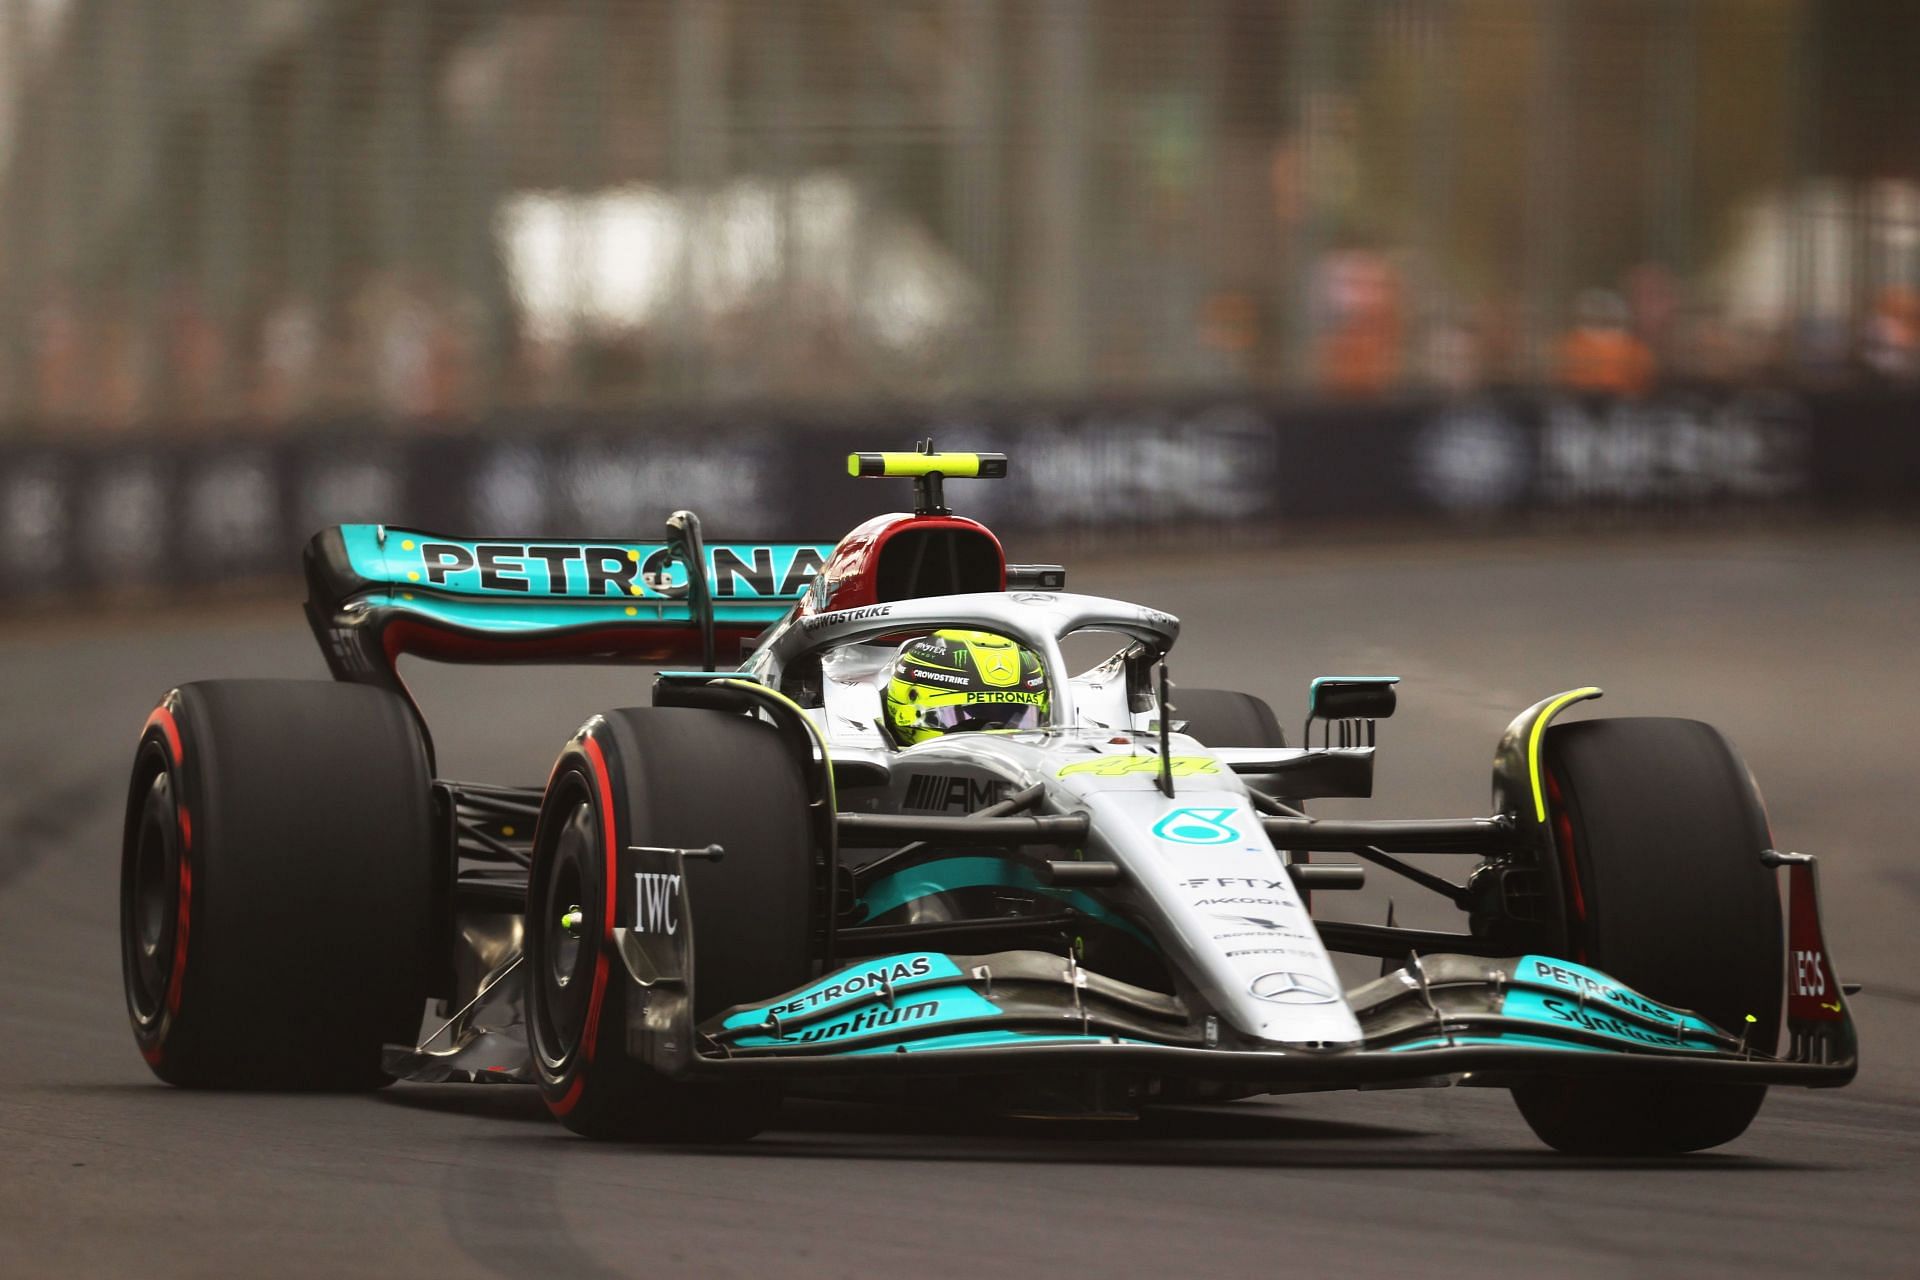 F1 Grand Prix of Australia - Qualifying (Photo by Robert Cianflone/Getty Images)